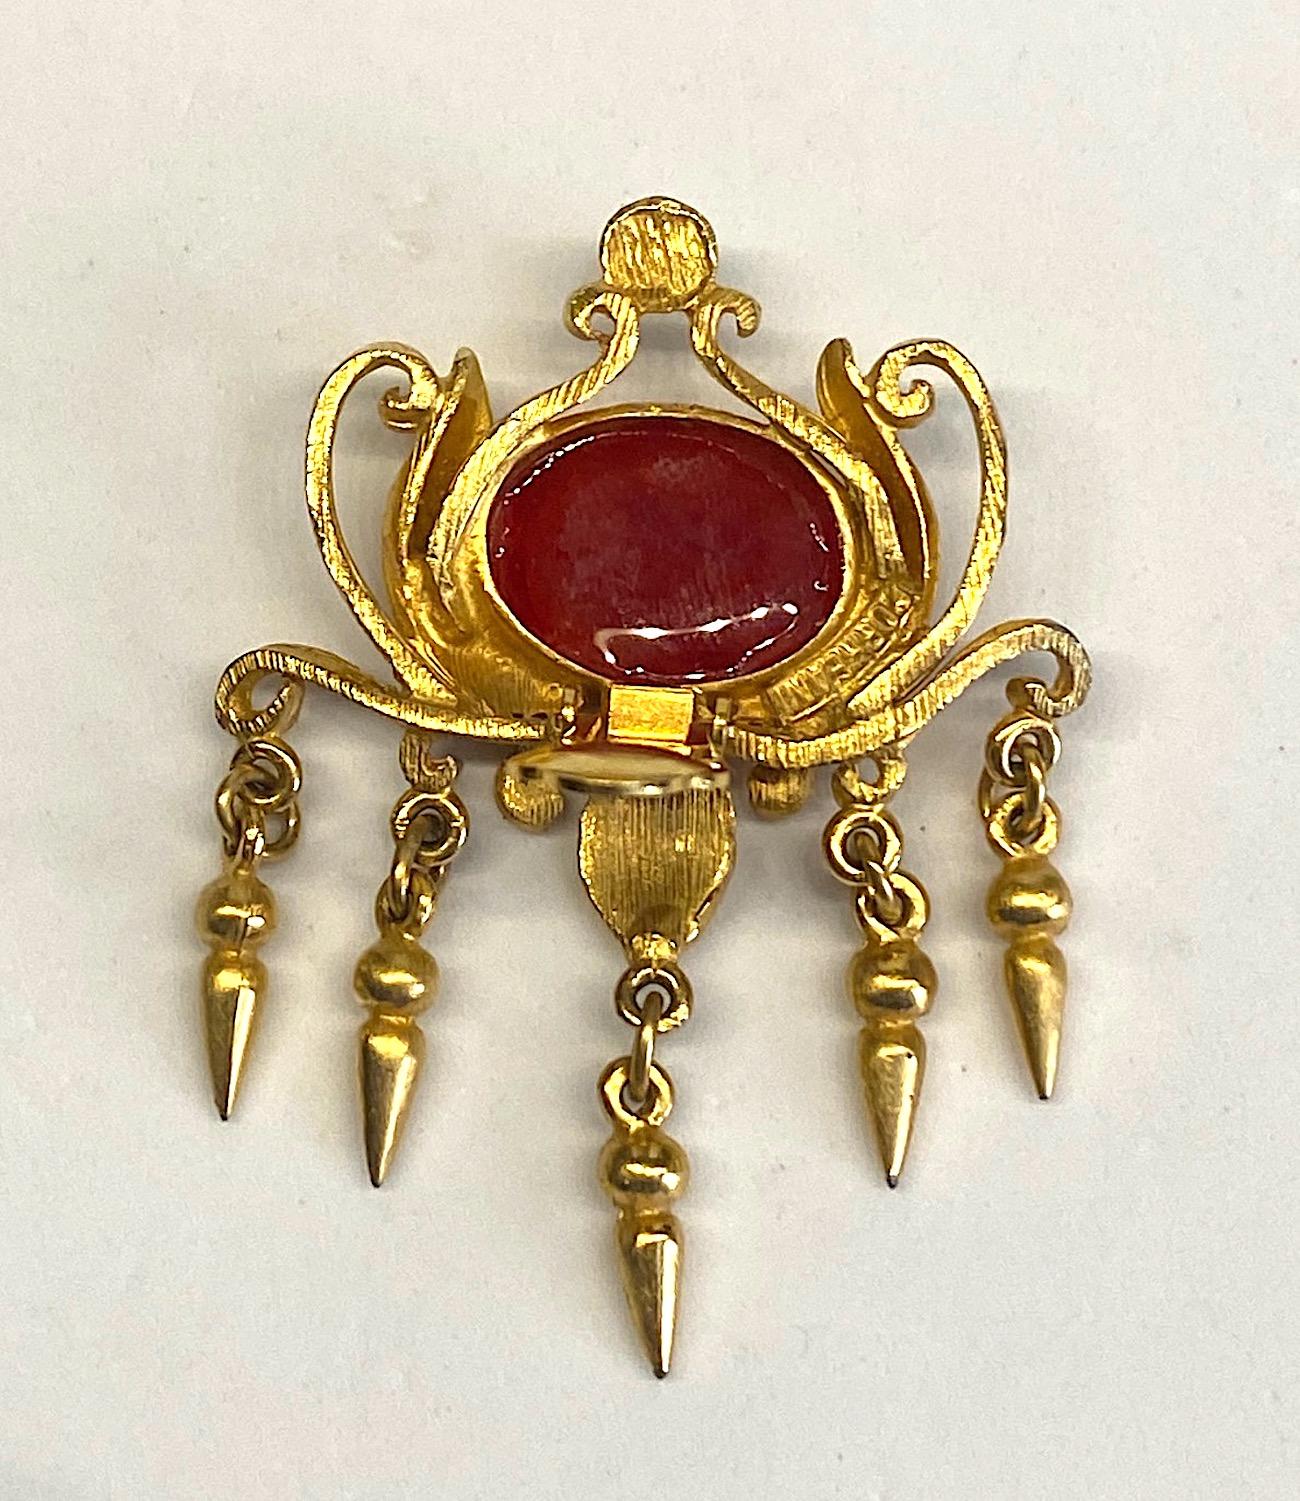 An intricate statement pair of 1980s earring by Italian jewelry designer Ugo Correani. Satin gold finish with large 13 x 18 mm faux red ruby cabochon. The earrings are meticulously crafted with hand soldered curly wires on a cast center piece with